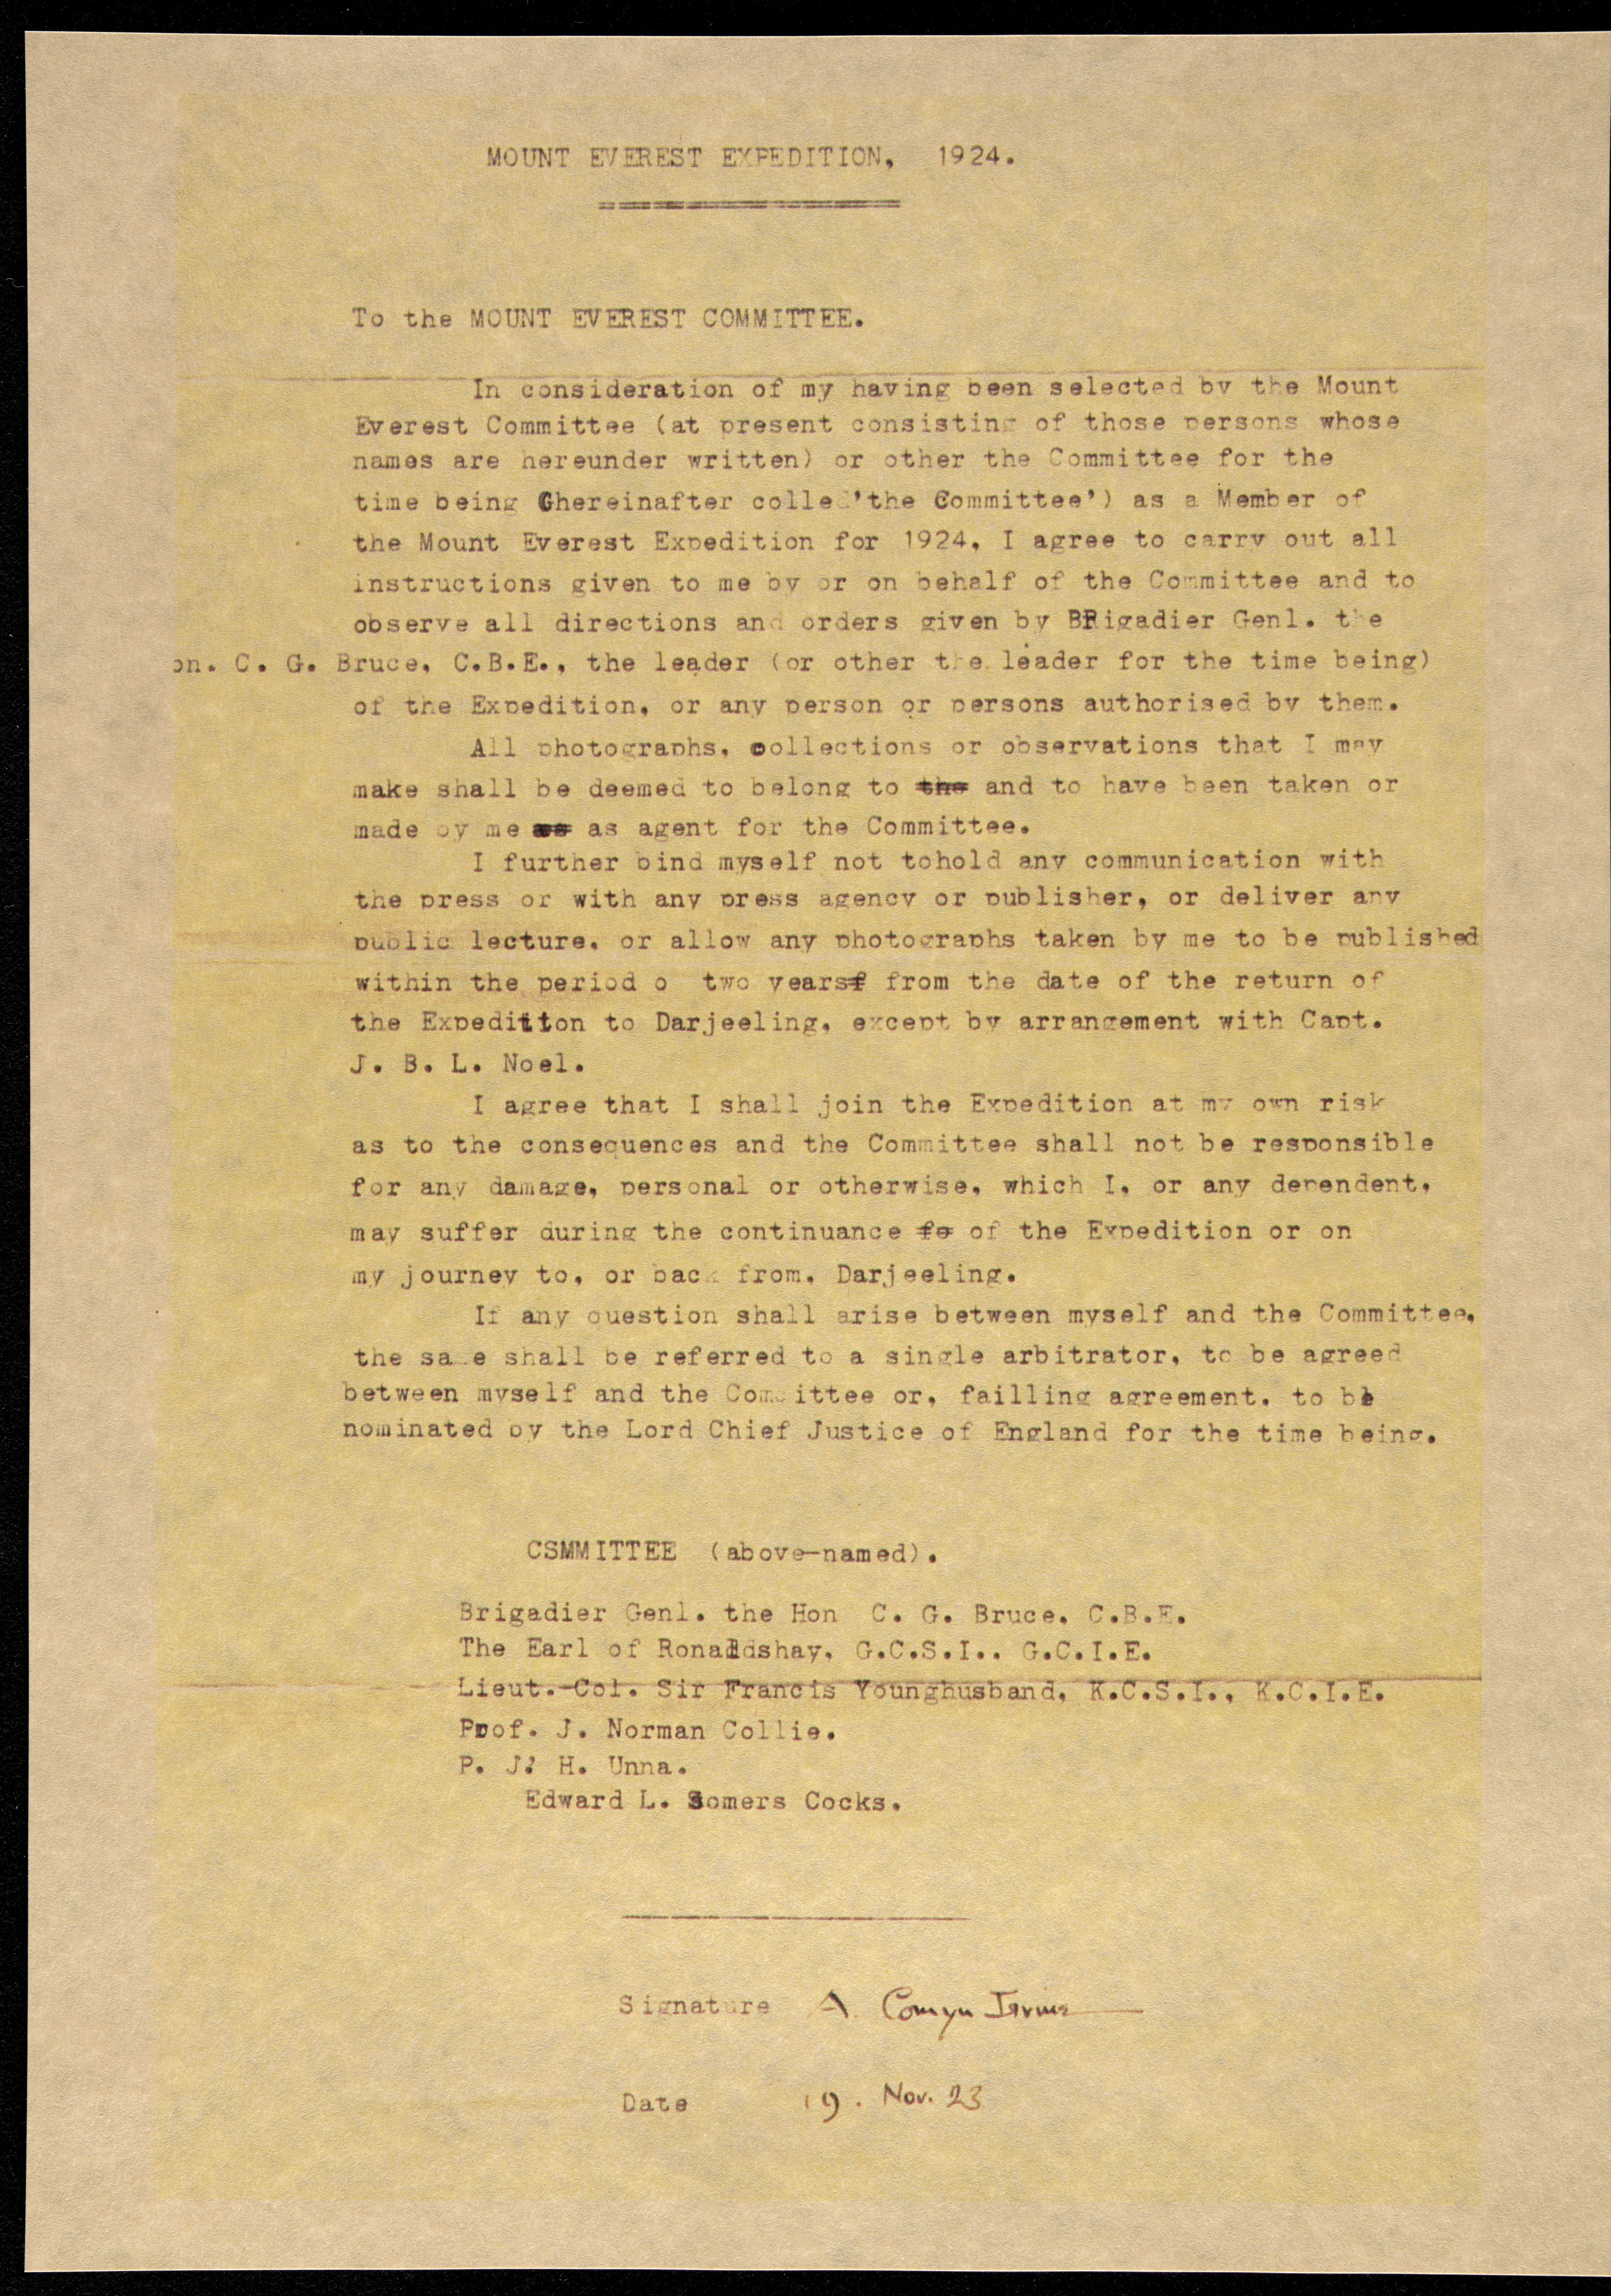 Letter confirming Sandy would join the expedition